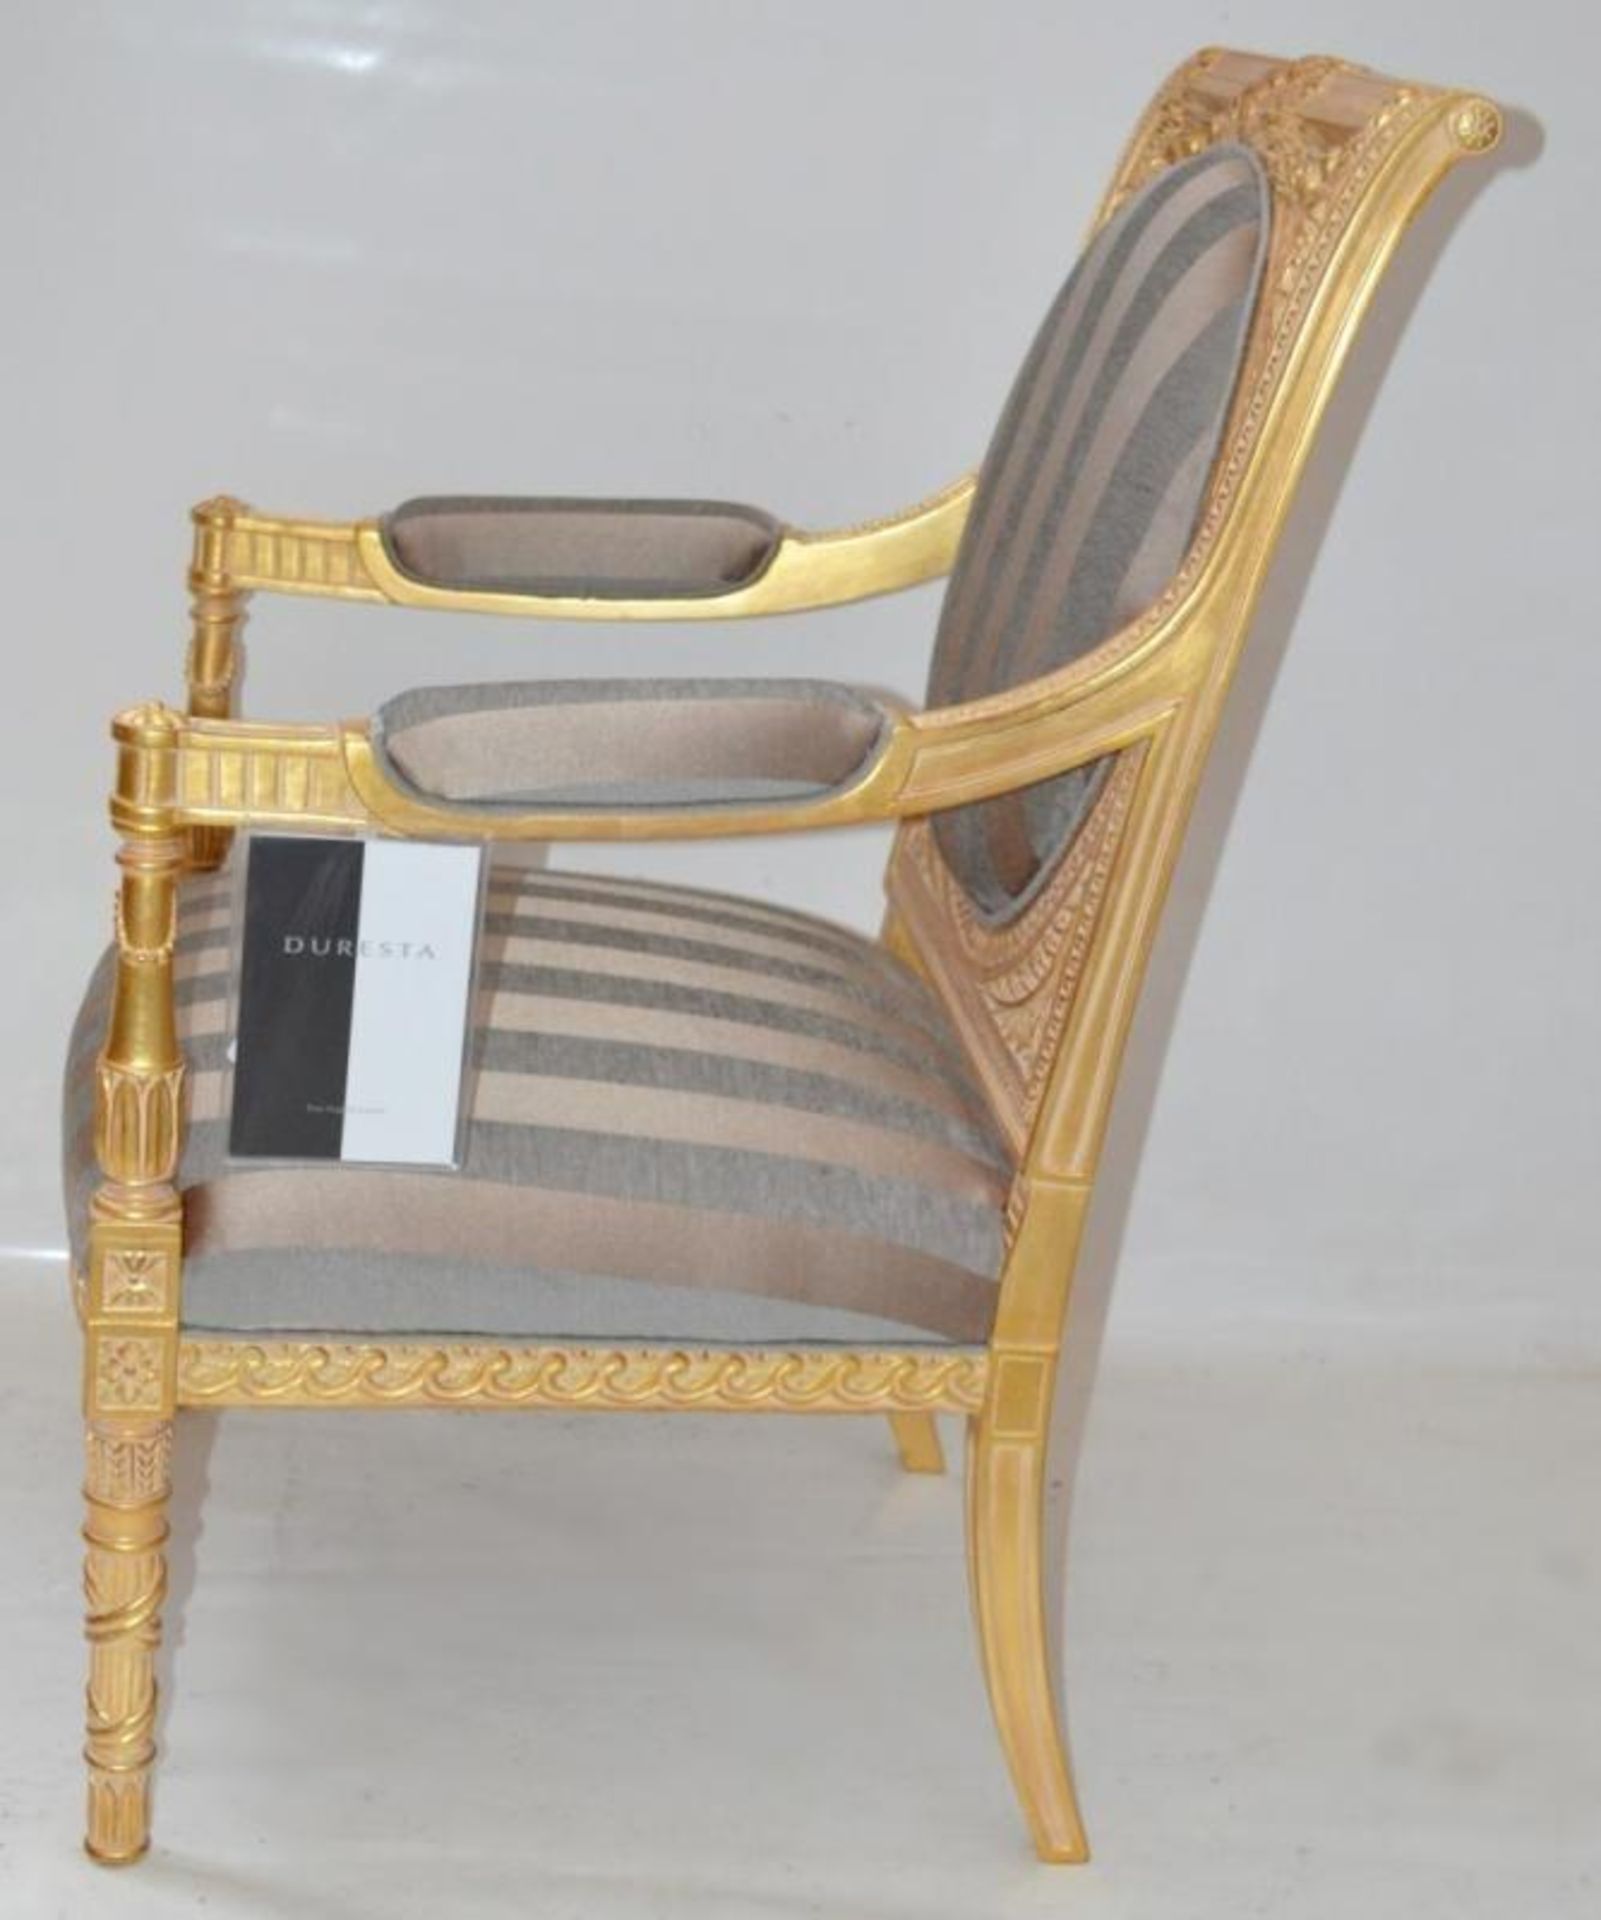 1 x DURESTA Flavia Chair - Features A Hand-Carved Hard Wood Frame With Hand-Stitched Coil Sprung Sea - Image 10 of 16